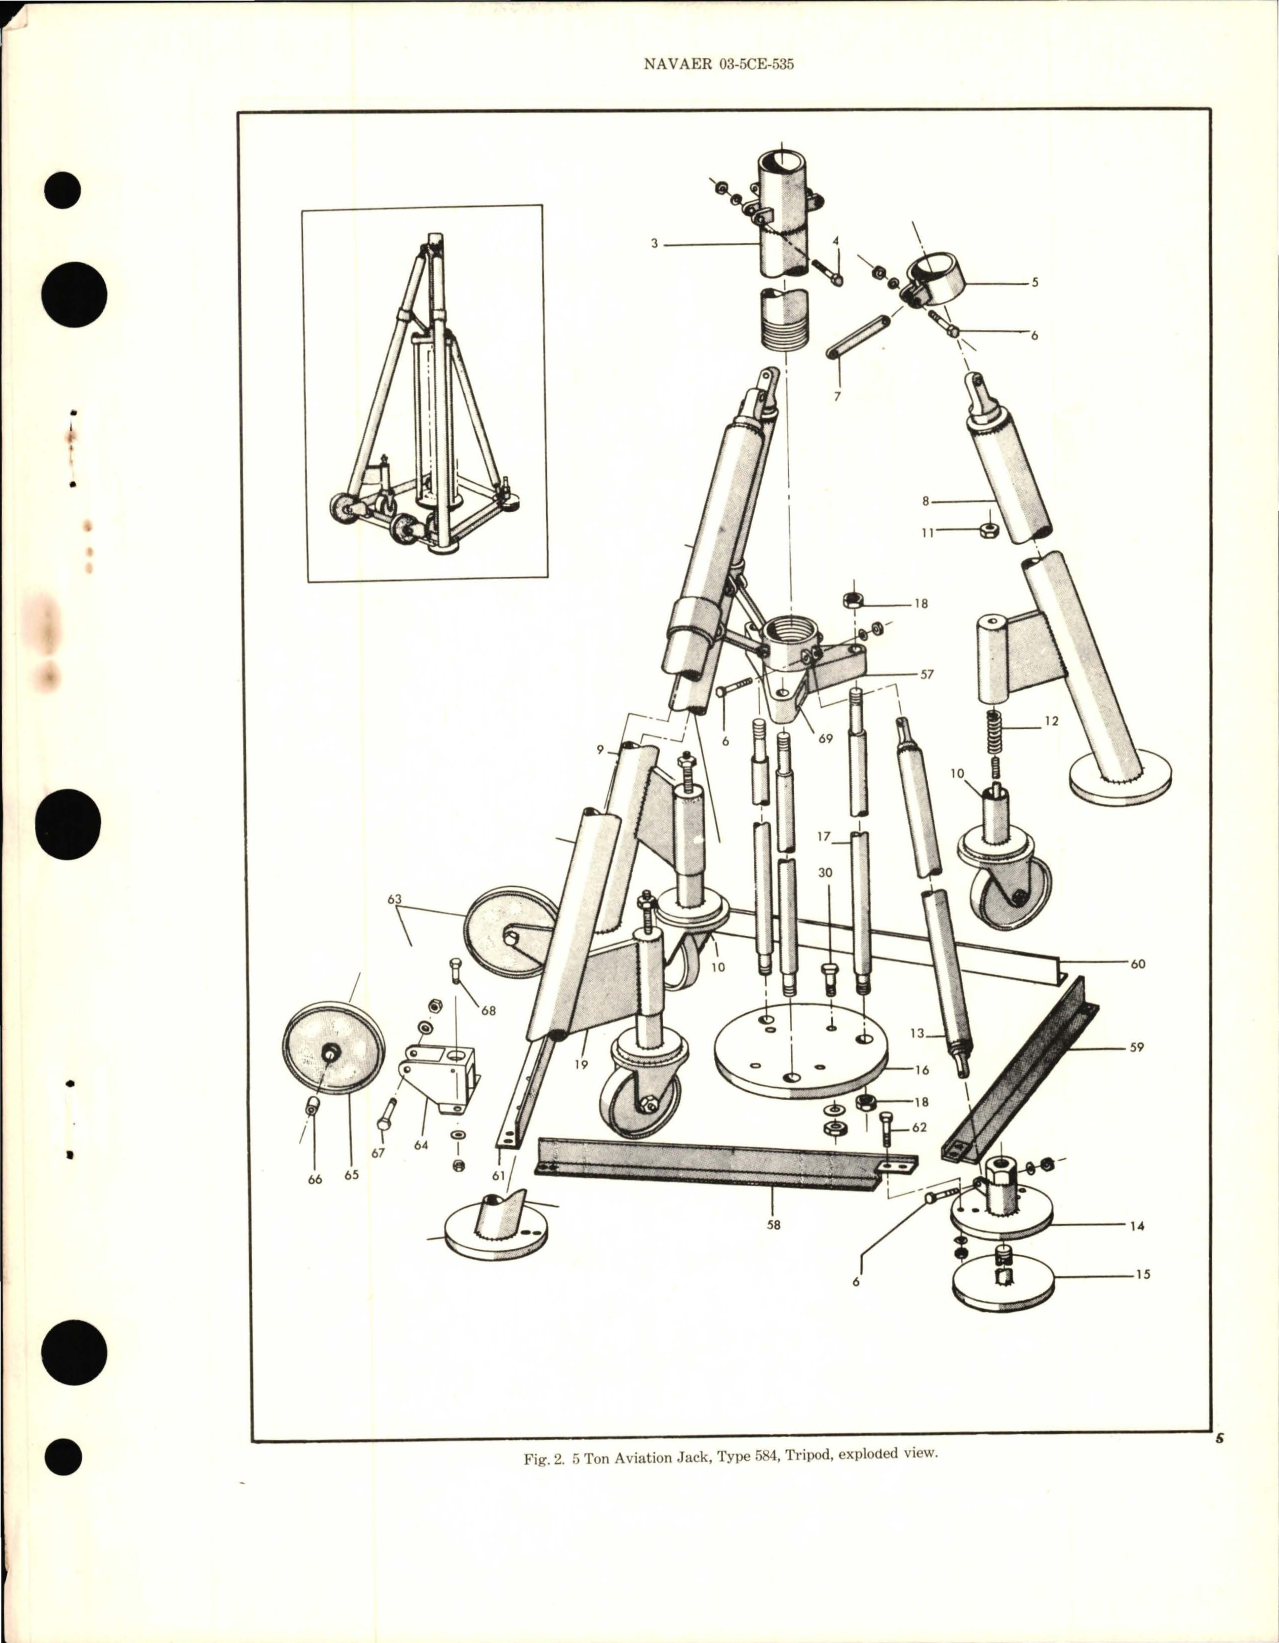 Sample page 5 from AirCorps Library document: Operations, Service and Overhaul Instructions with Parts Breakdown for Hydro Mechanical Aviation Jack, Single Stage Type 584